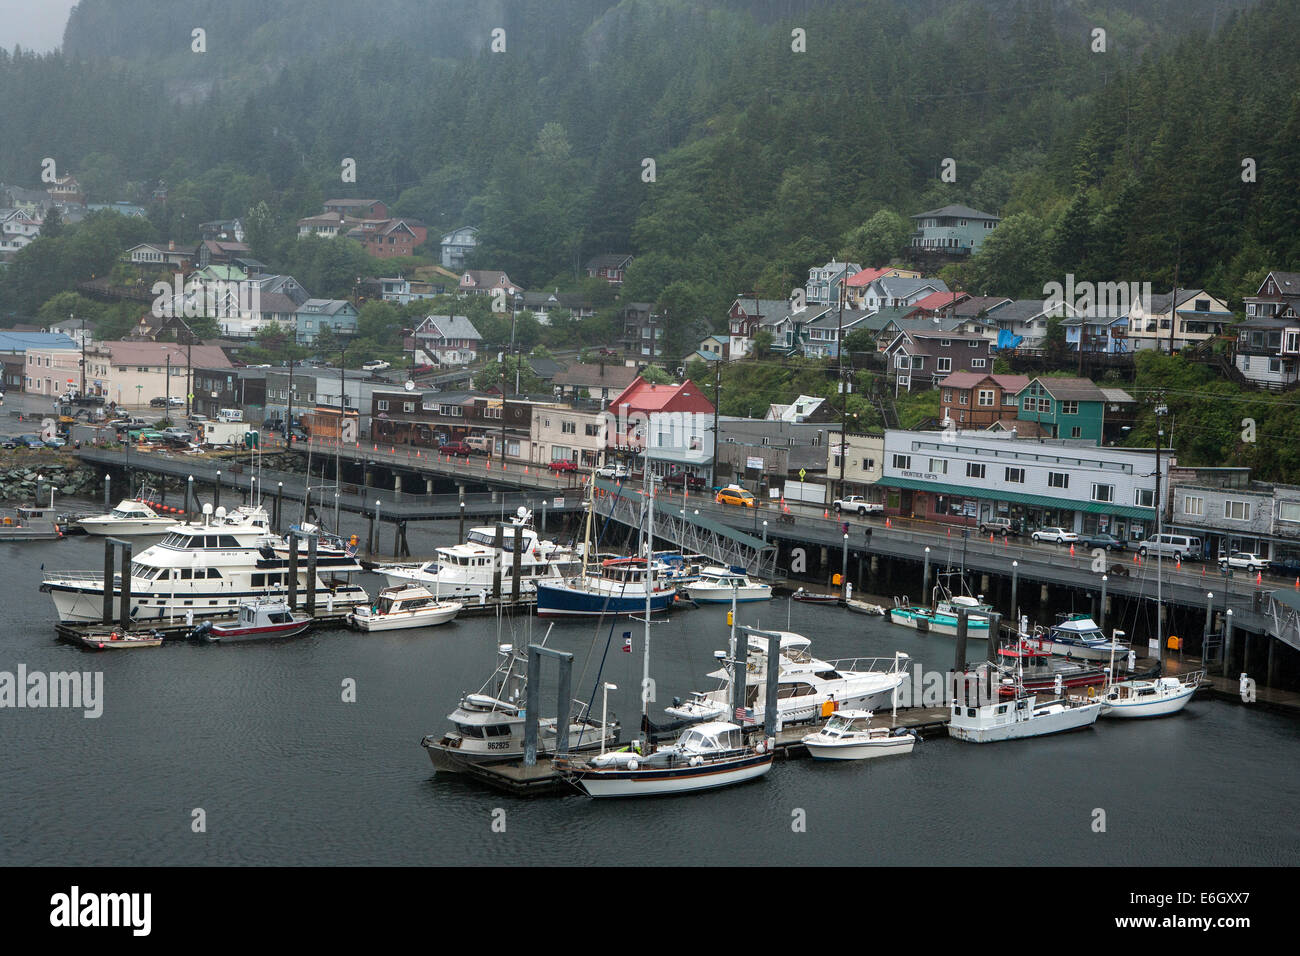 Ketchikan is one of the stops on the Alaskan cruise for the Norwegian Pearl. Cruise ship tourism drives a large part of the loca Stock Photo